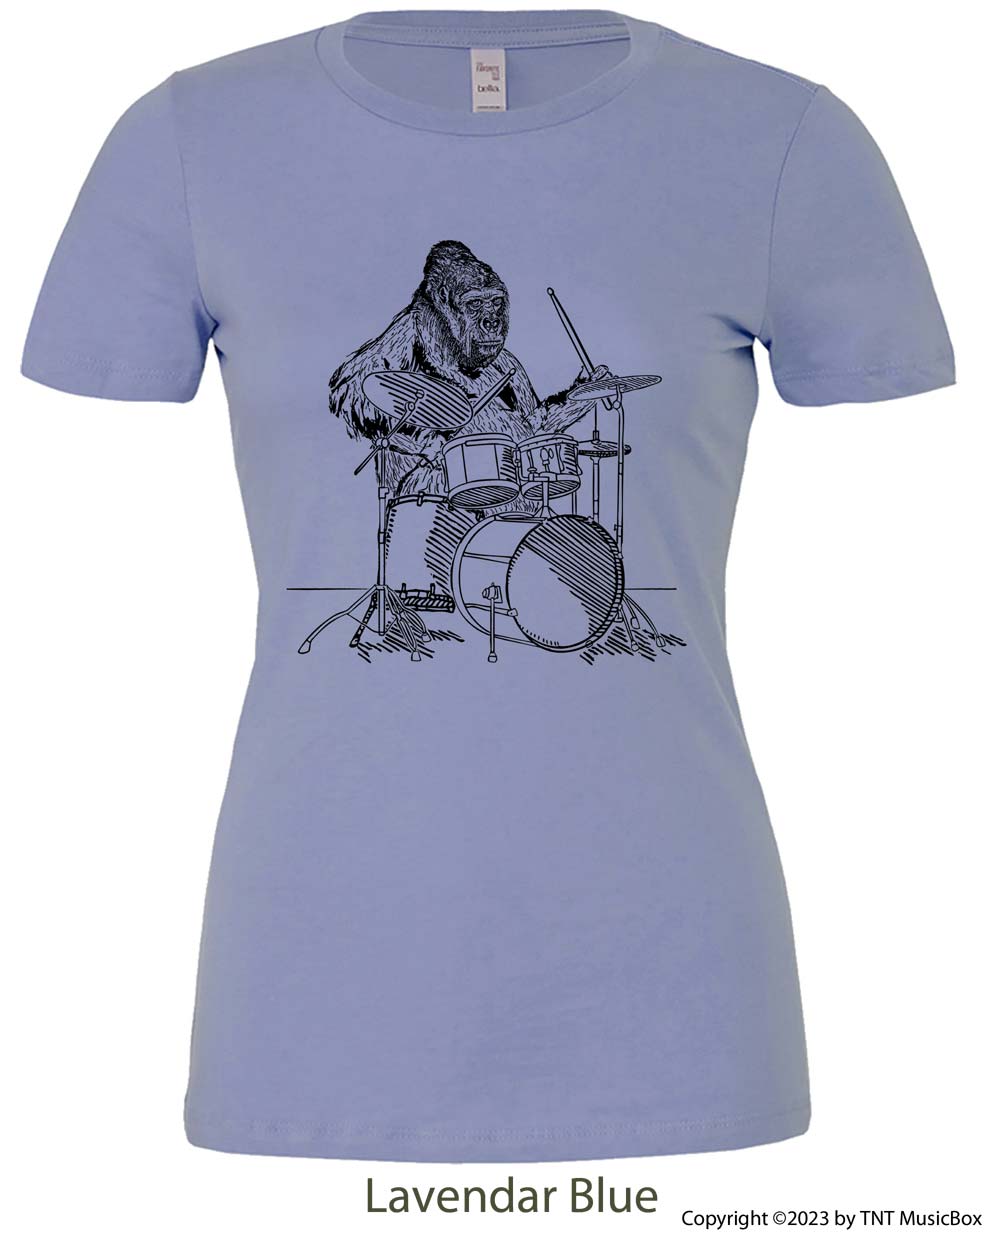 Gorilla playing drums on a Lavender Blue t-shirt.